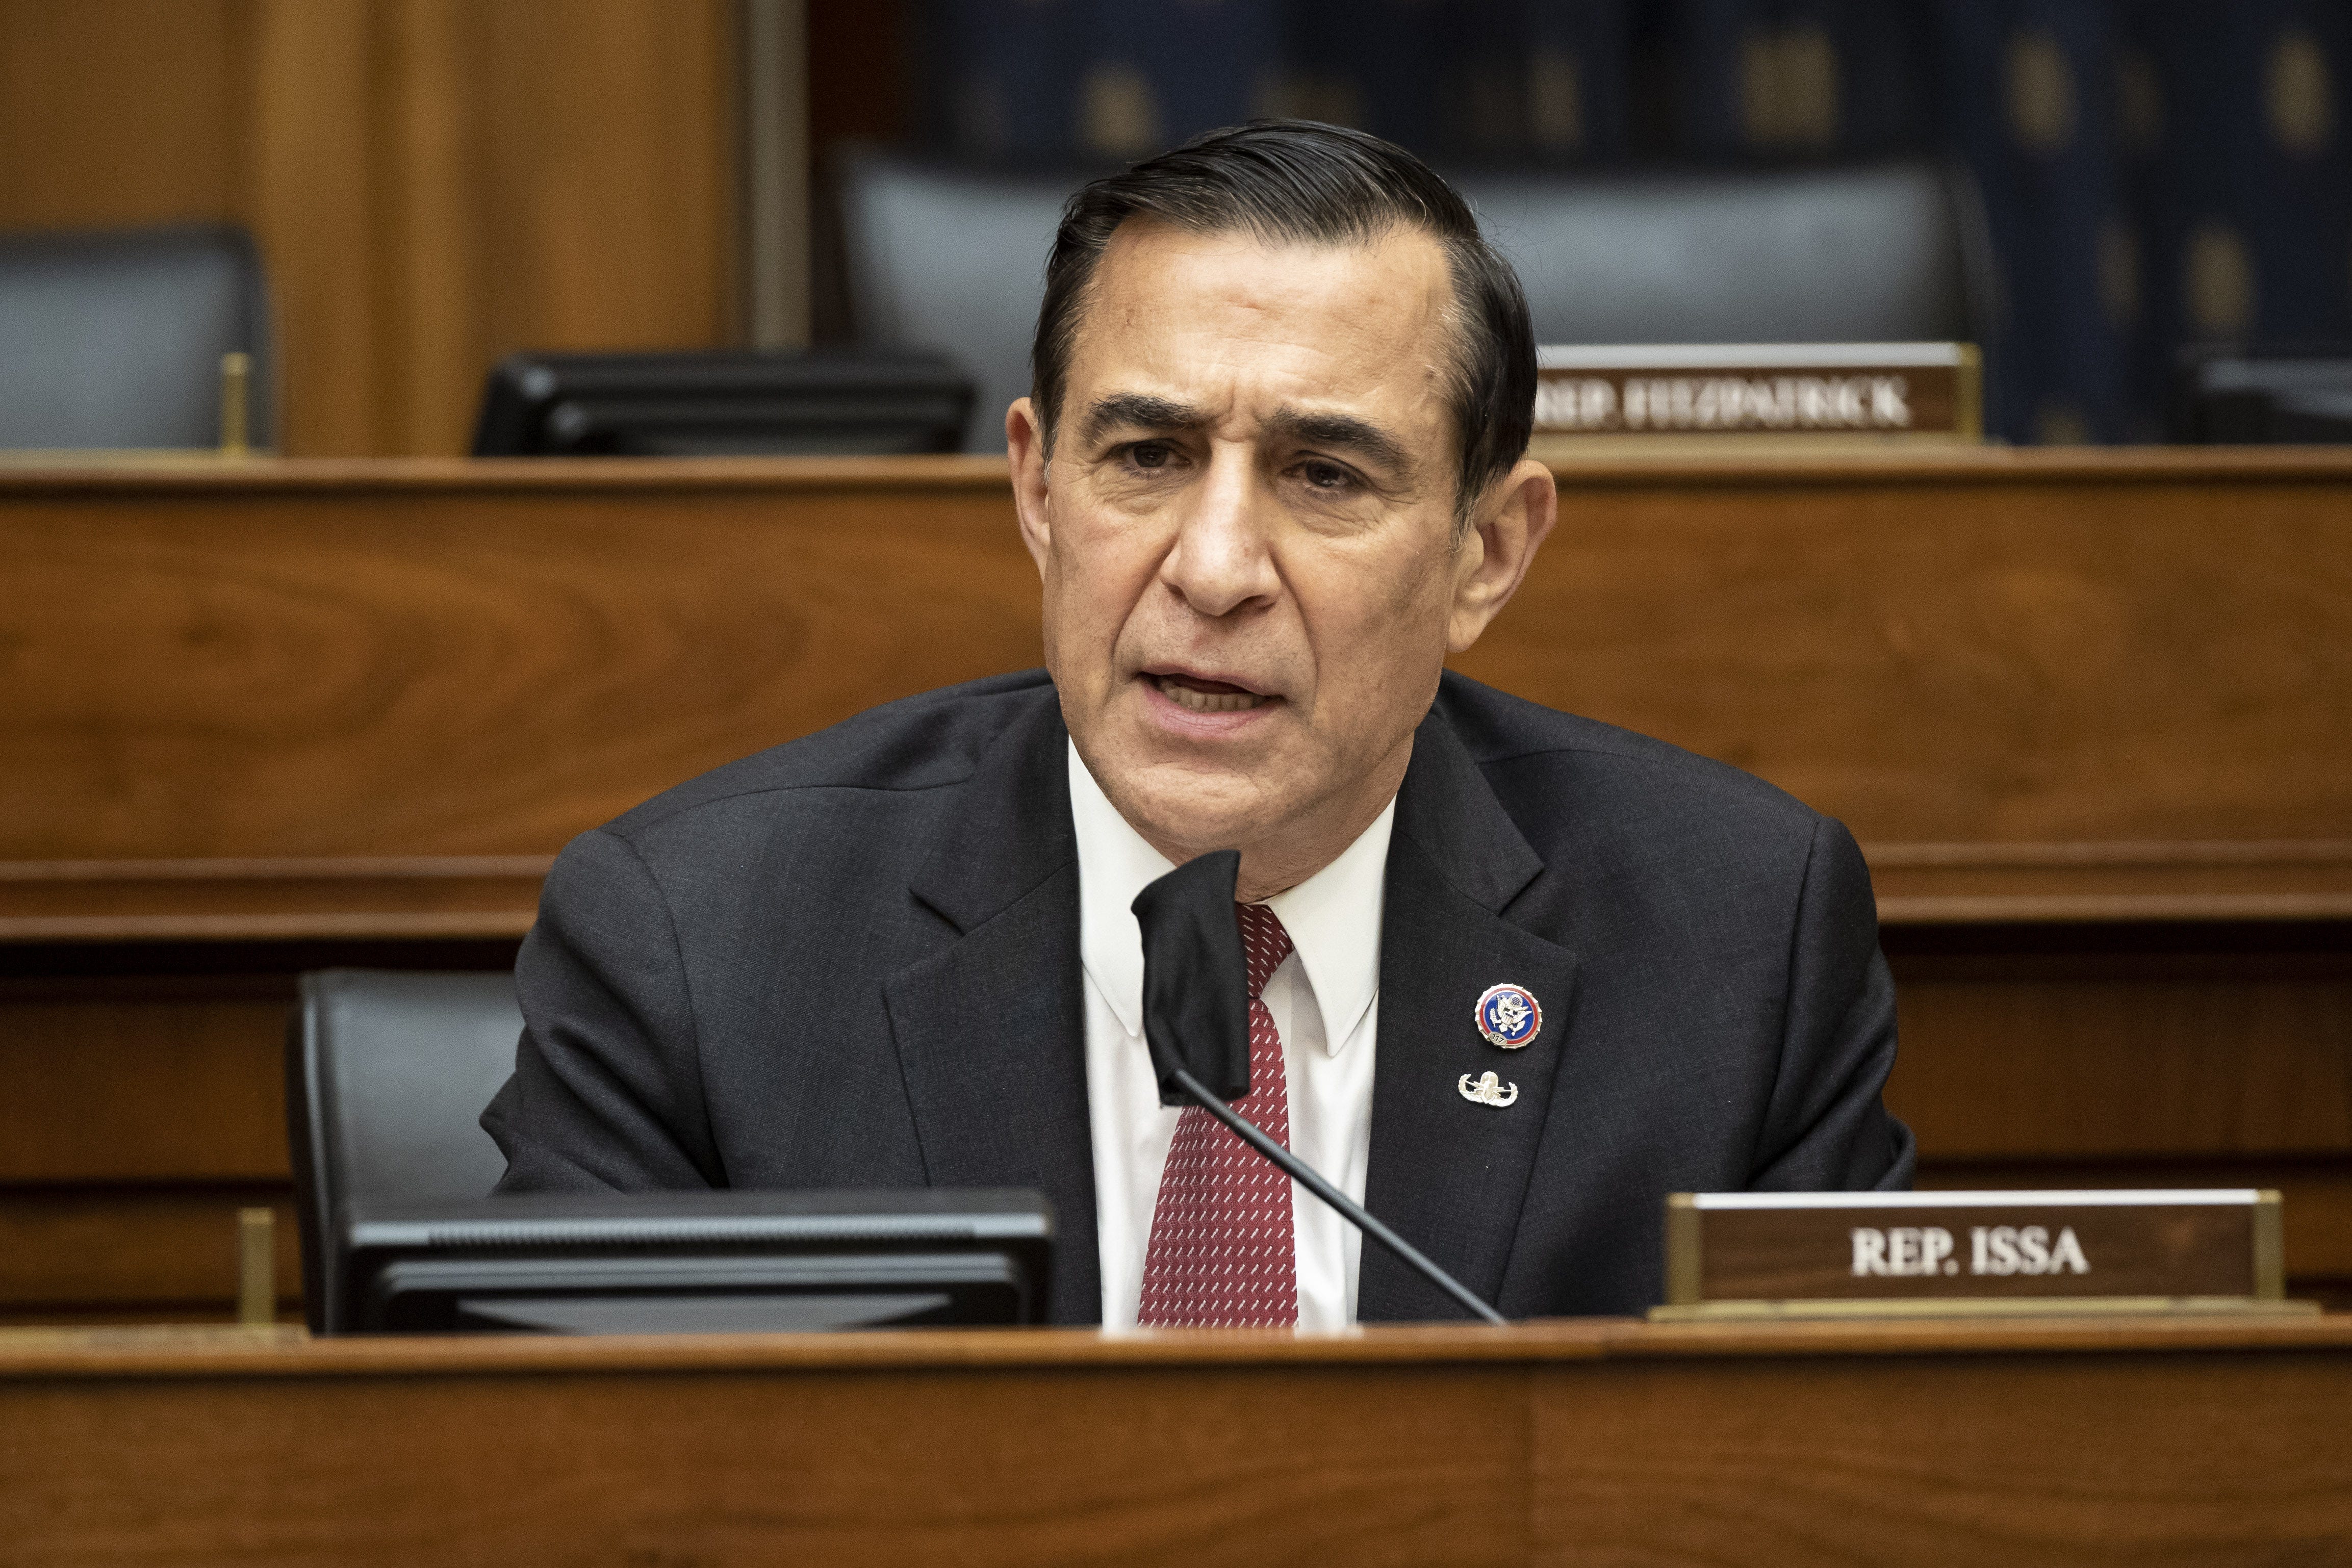 Issa rejects White House 'spin' on China visit during Tiananmen anniversary: 'Embarrassed on the world stage'